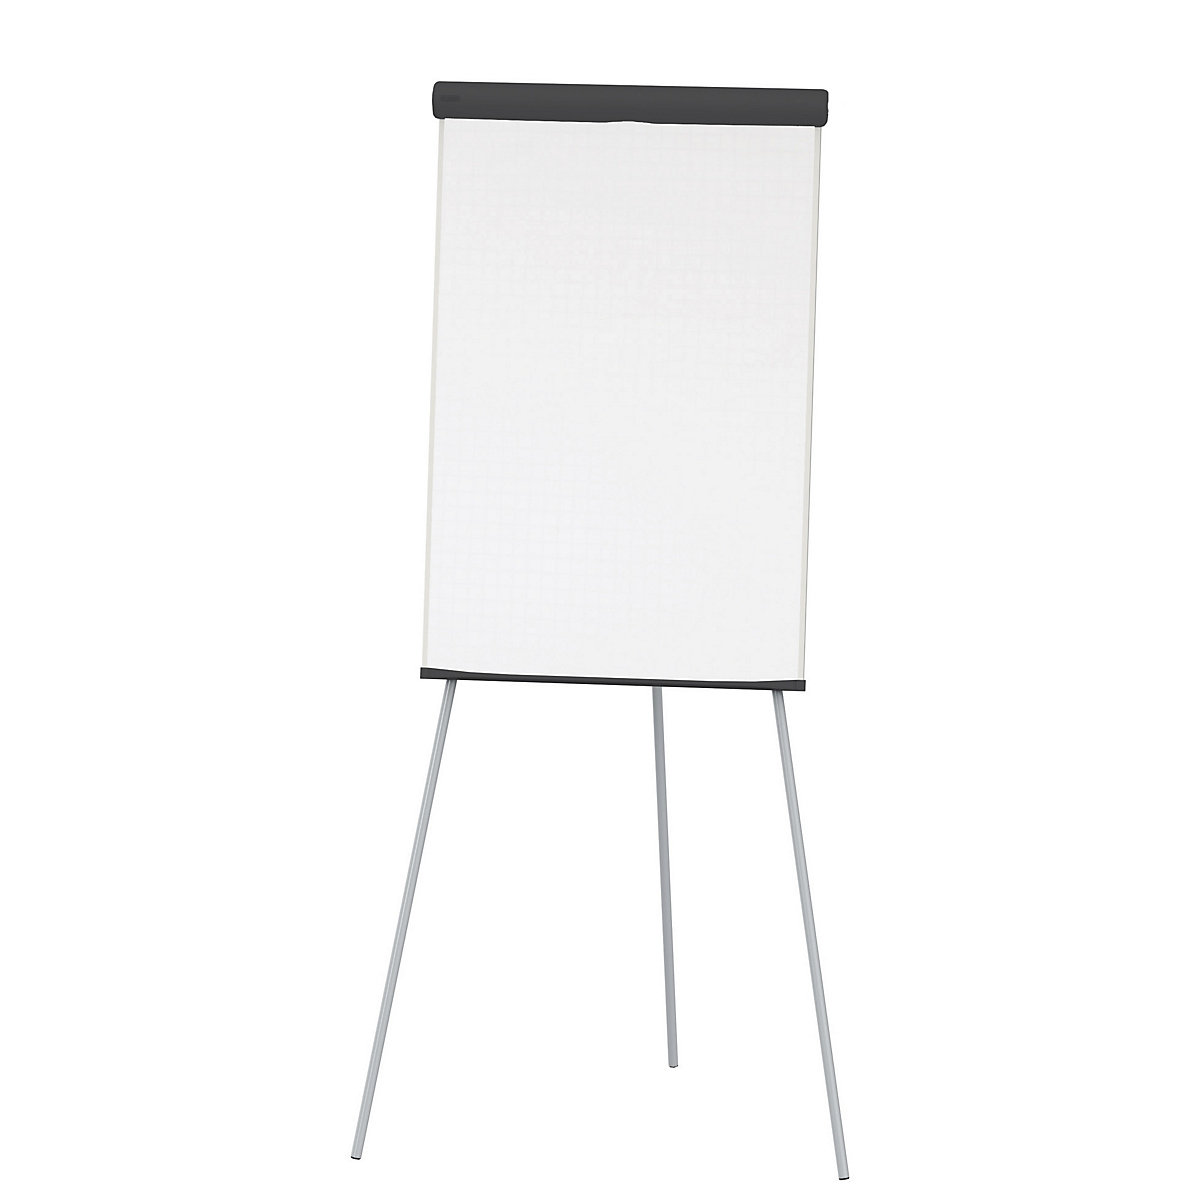 NATURAL flip-chart: HxW 1950 x 690 mm, frame with wood finish